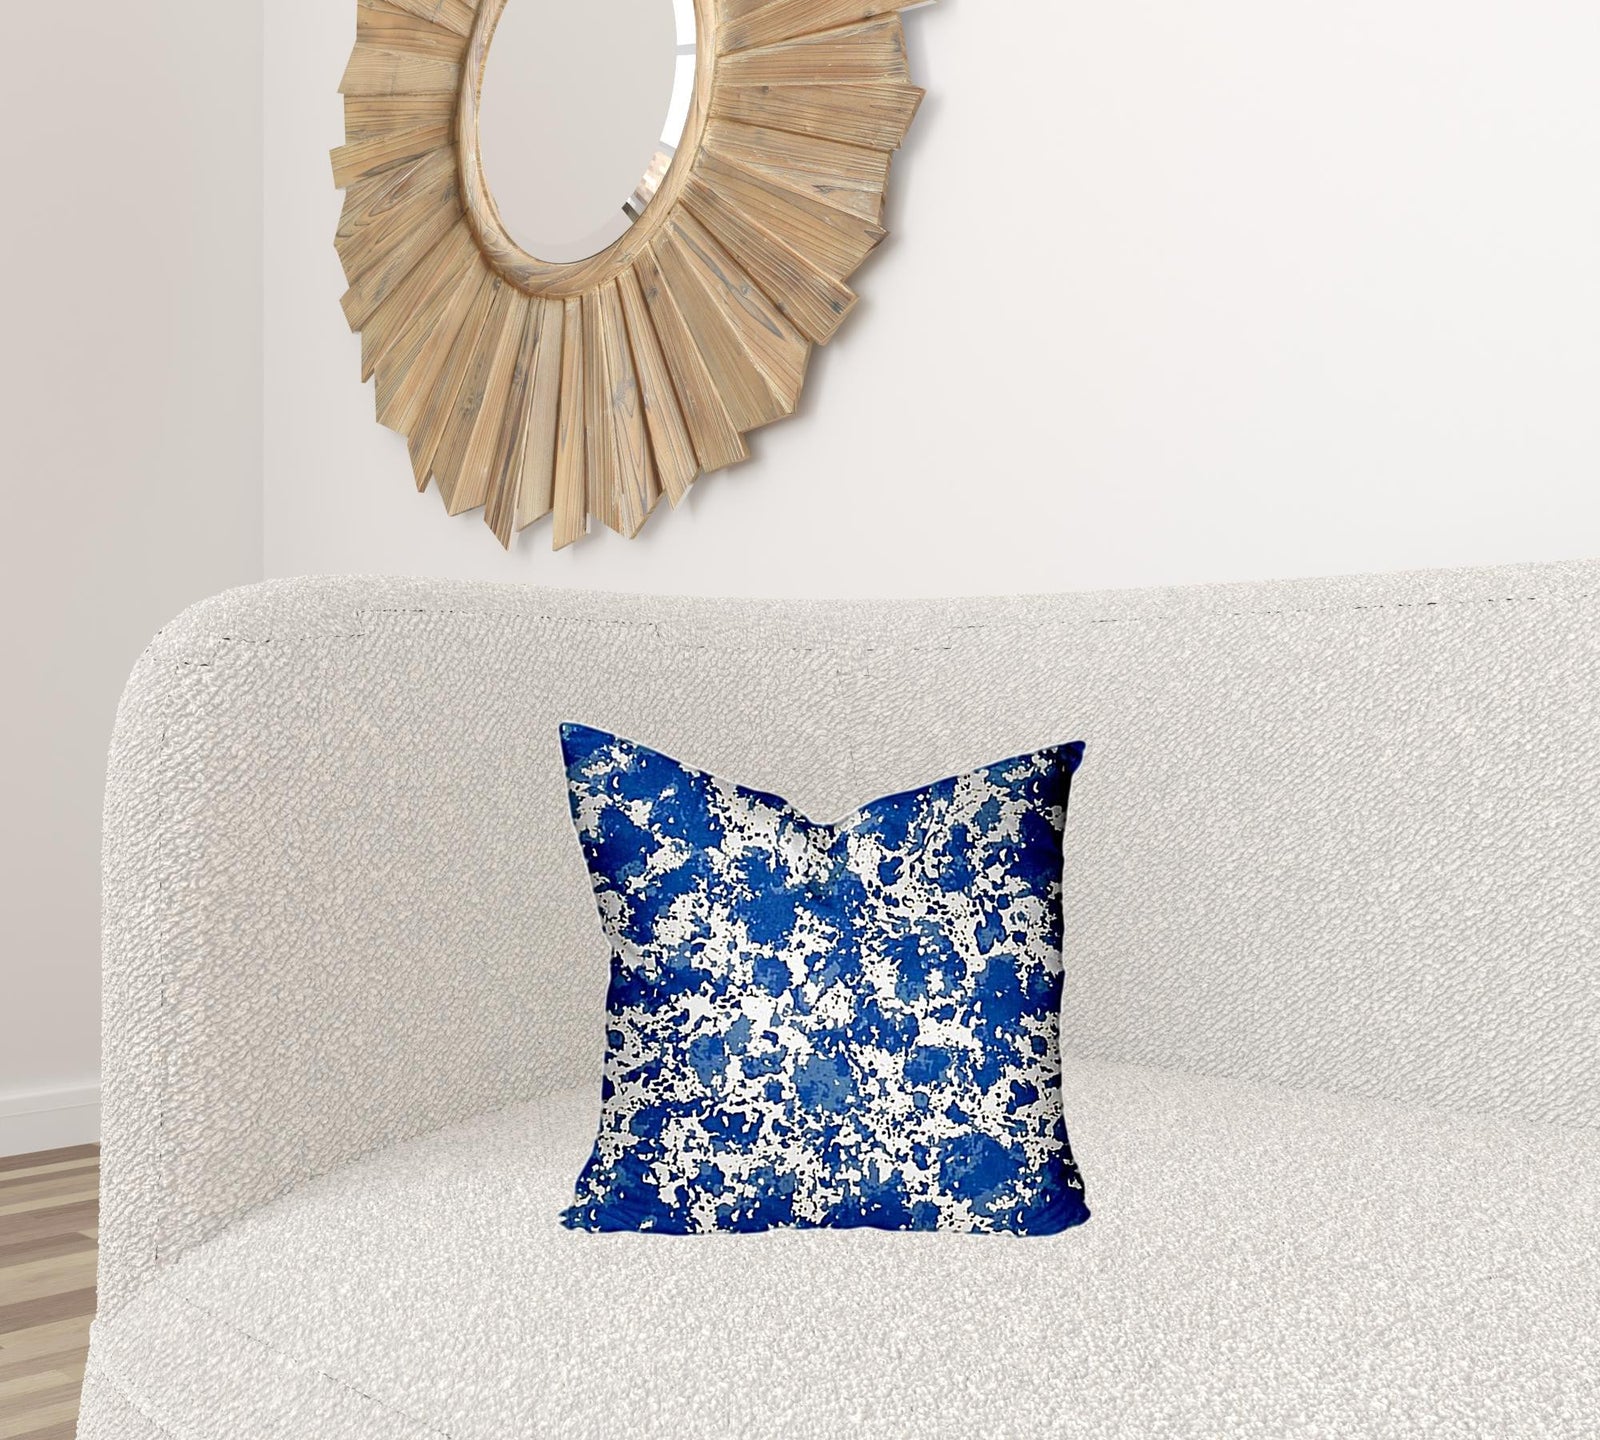 17" X 17" Blue And White Enveloped Coastal Throw Indoor Outdoor Pillow